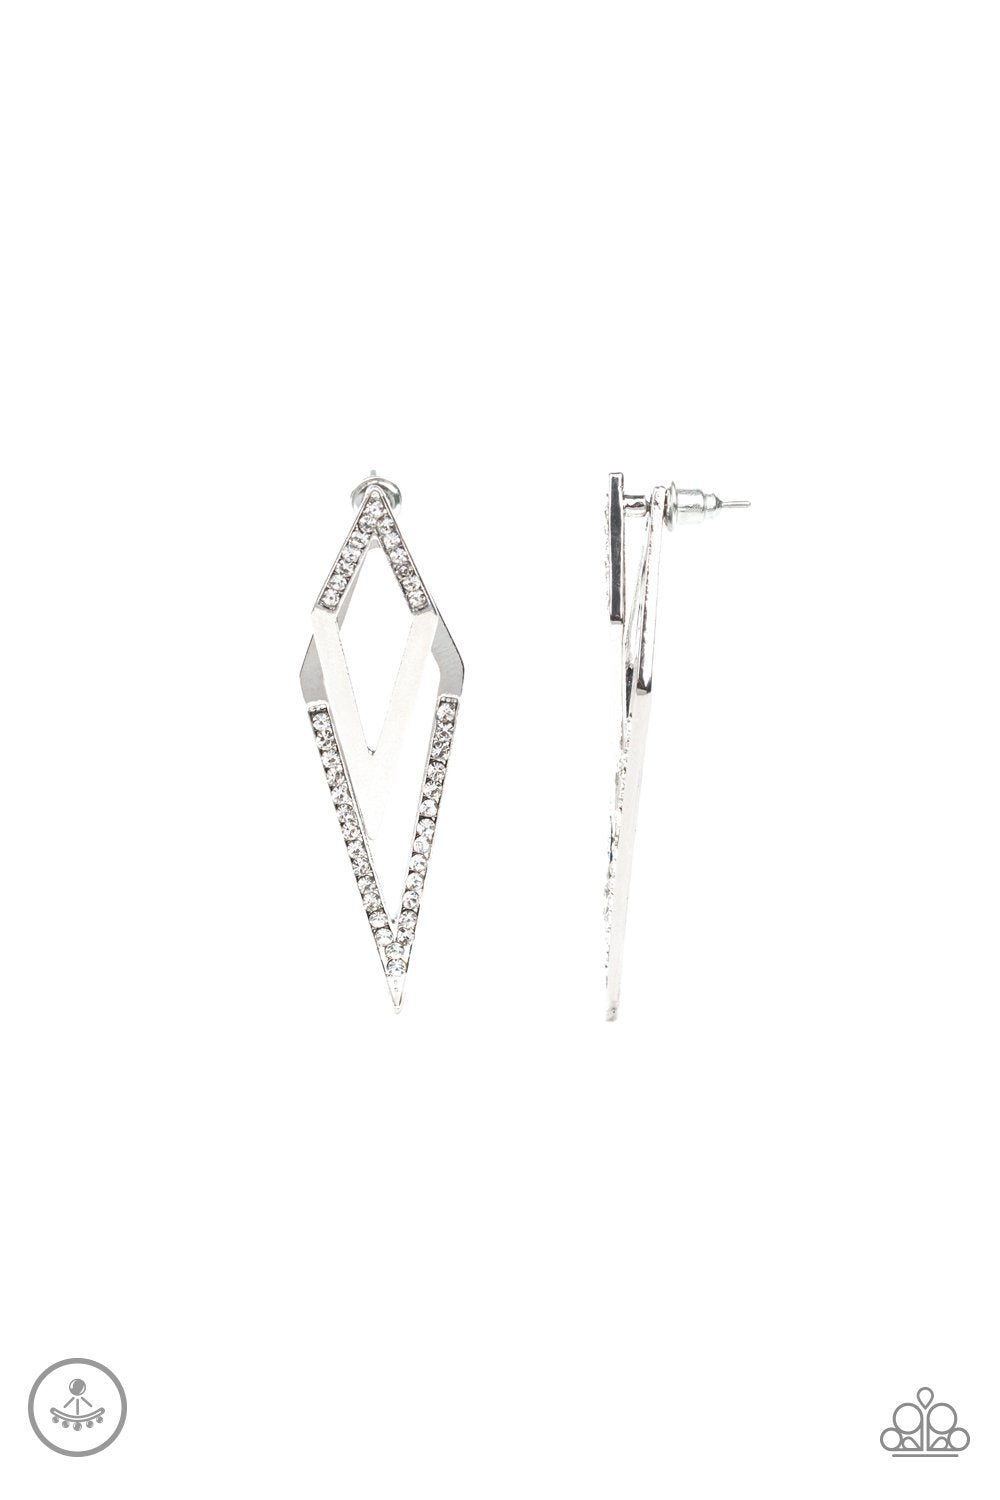 Point-BANK Silver and White Rhinestone double-sided Post Earrings - Paparazzi Accessories-CarasShop.com - $5 Jewelry by Cara Jewels